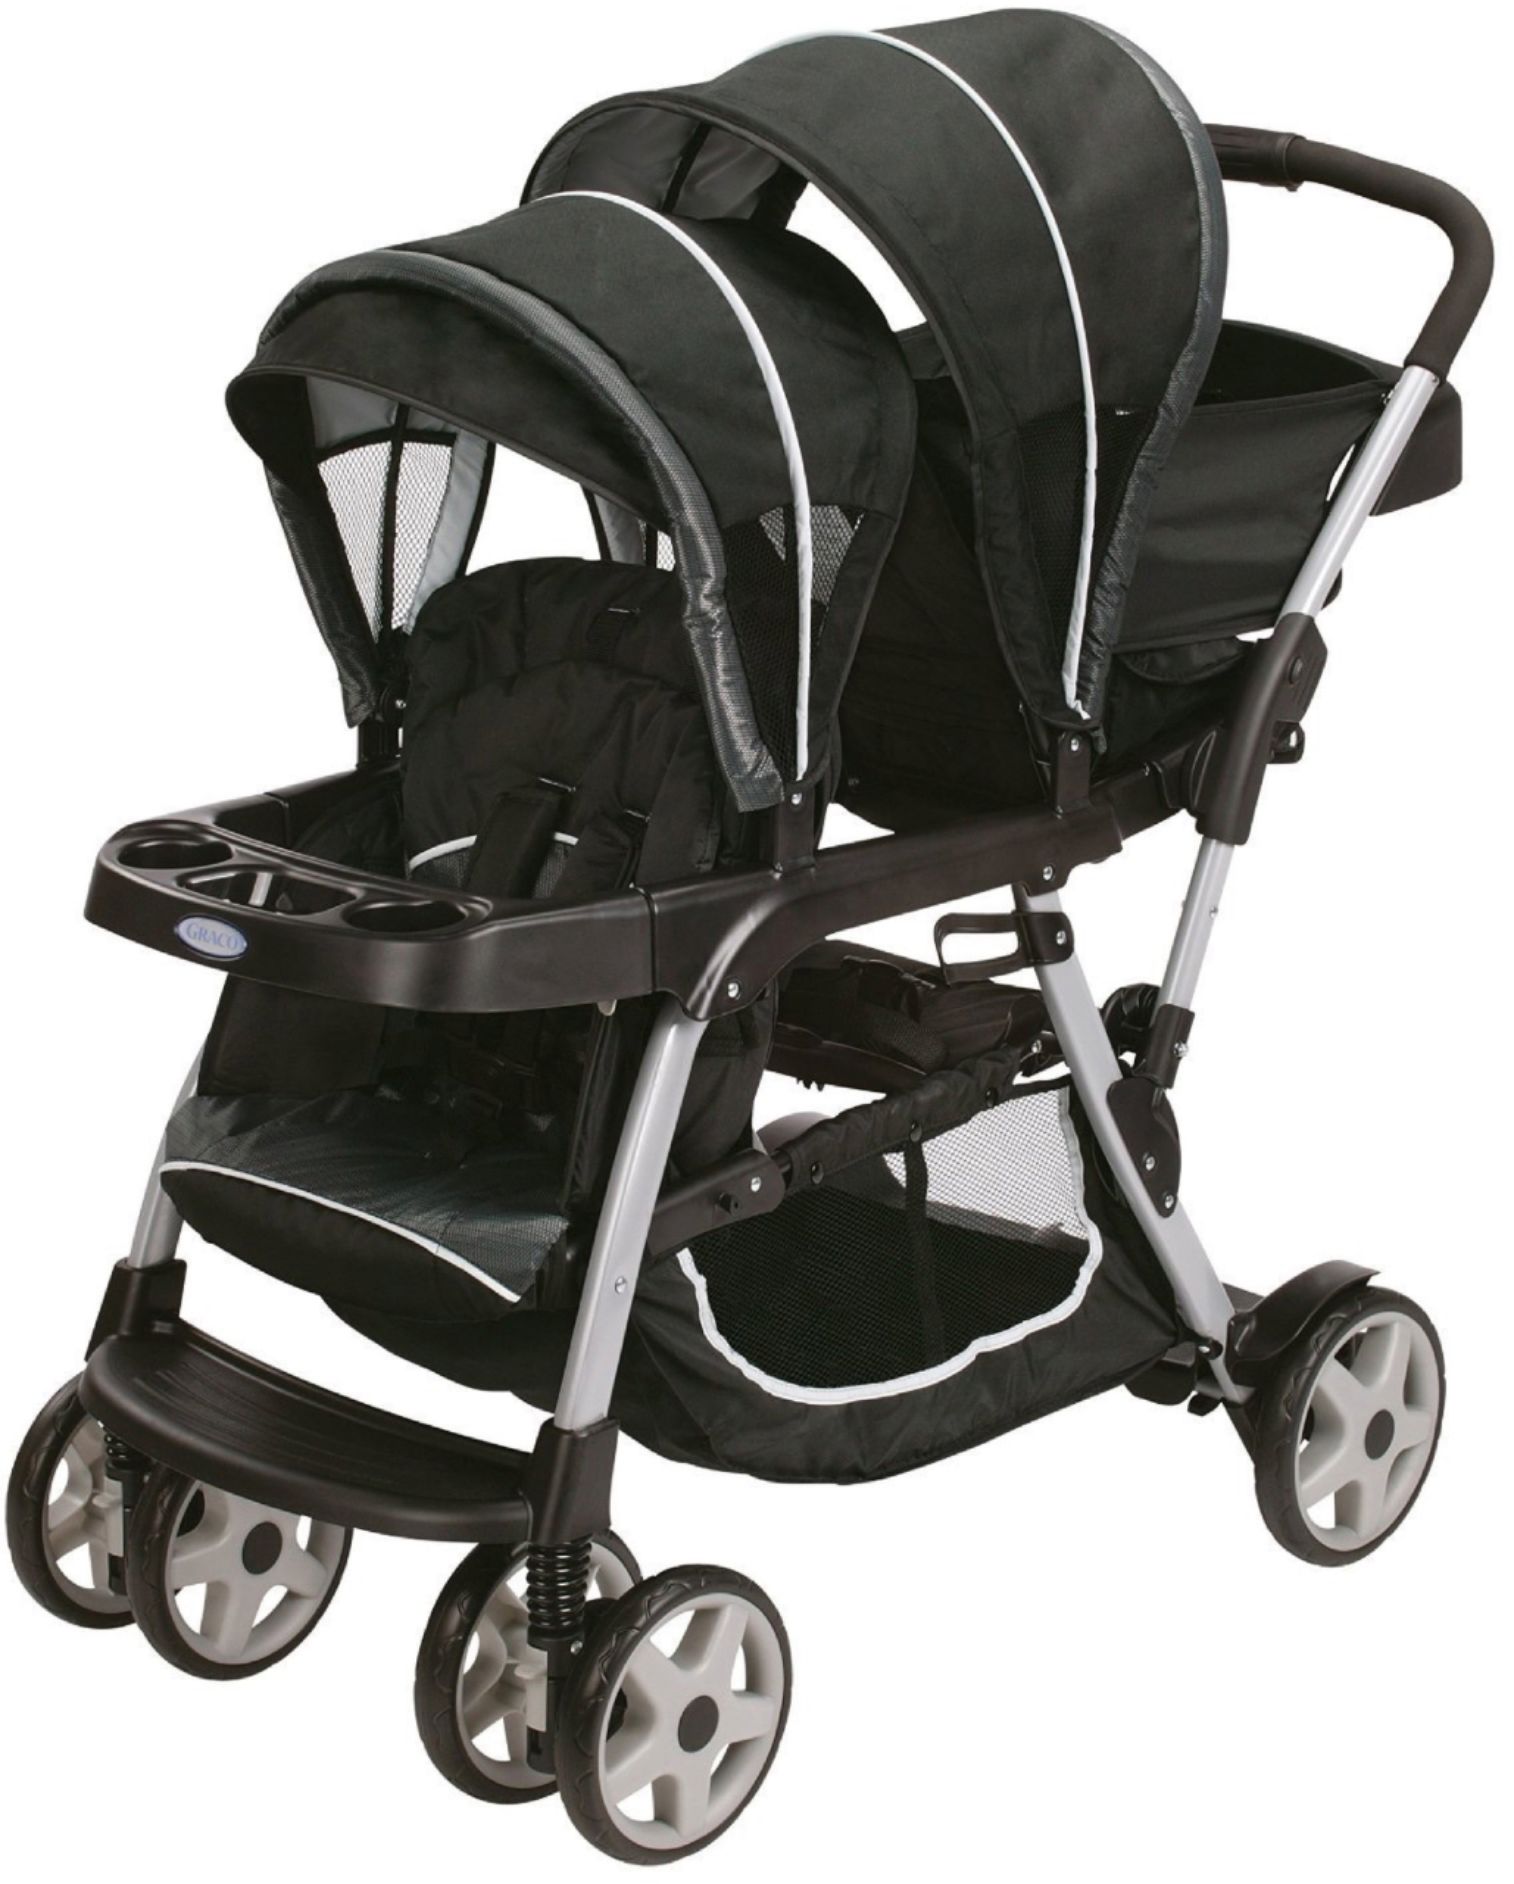 Angle View: Graco Ready2Grow Click Connect LX Double Stroller, Gotham